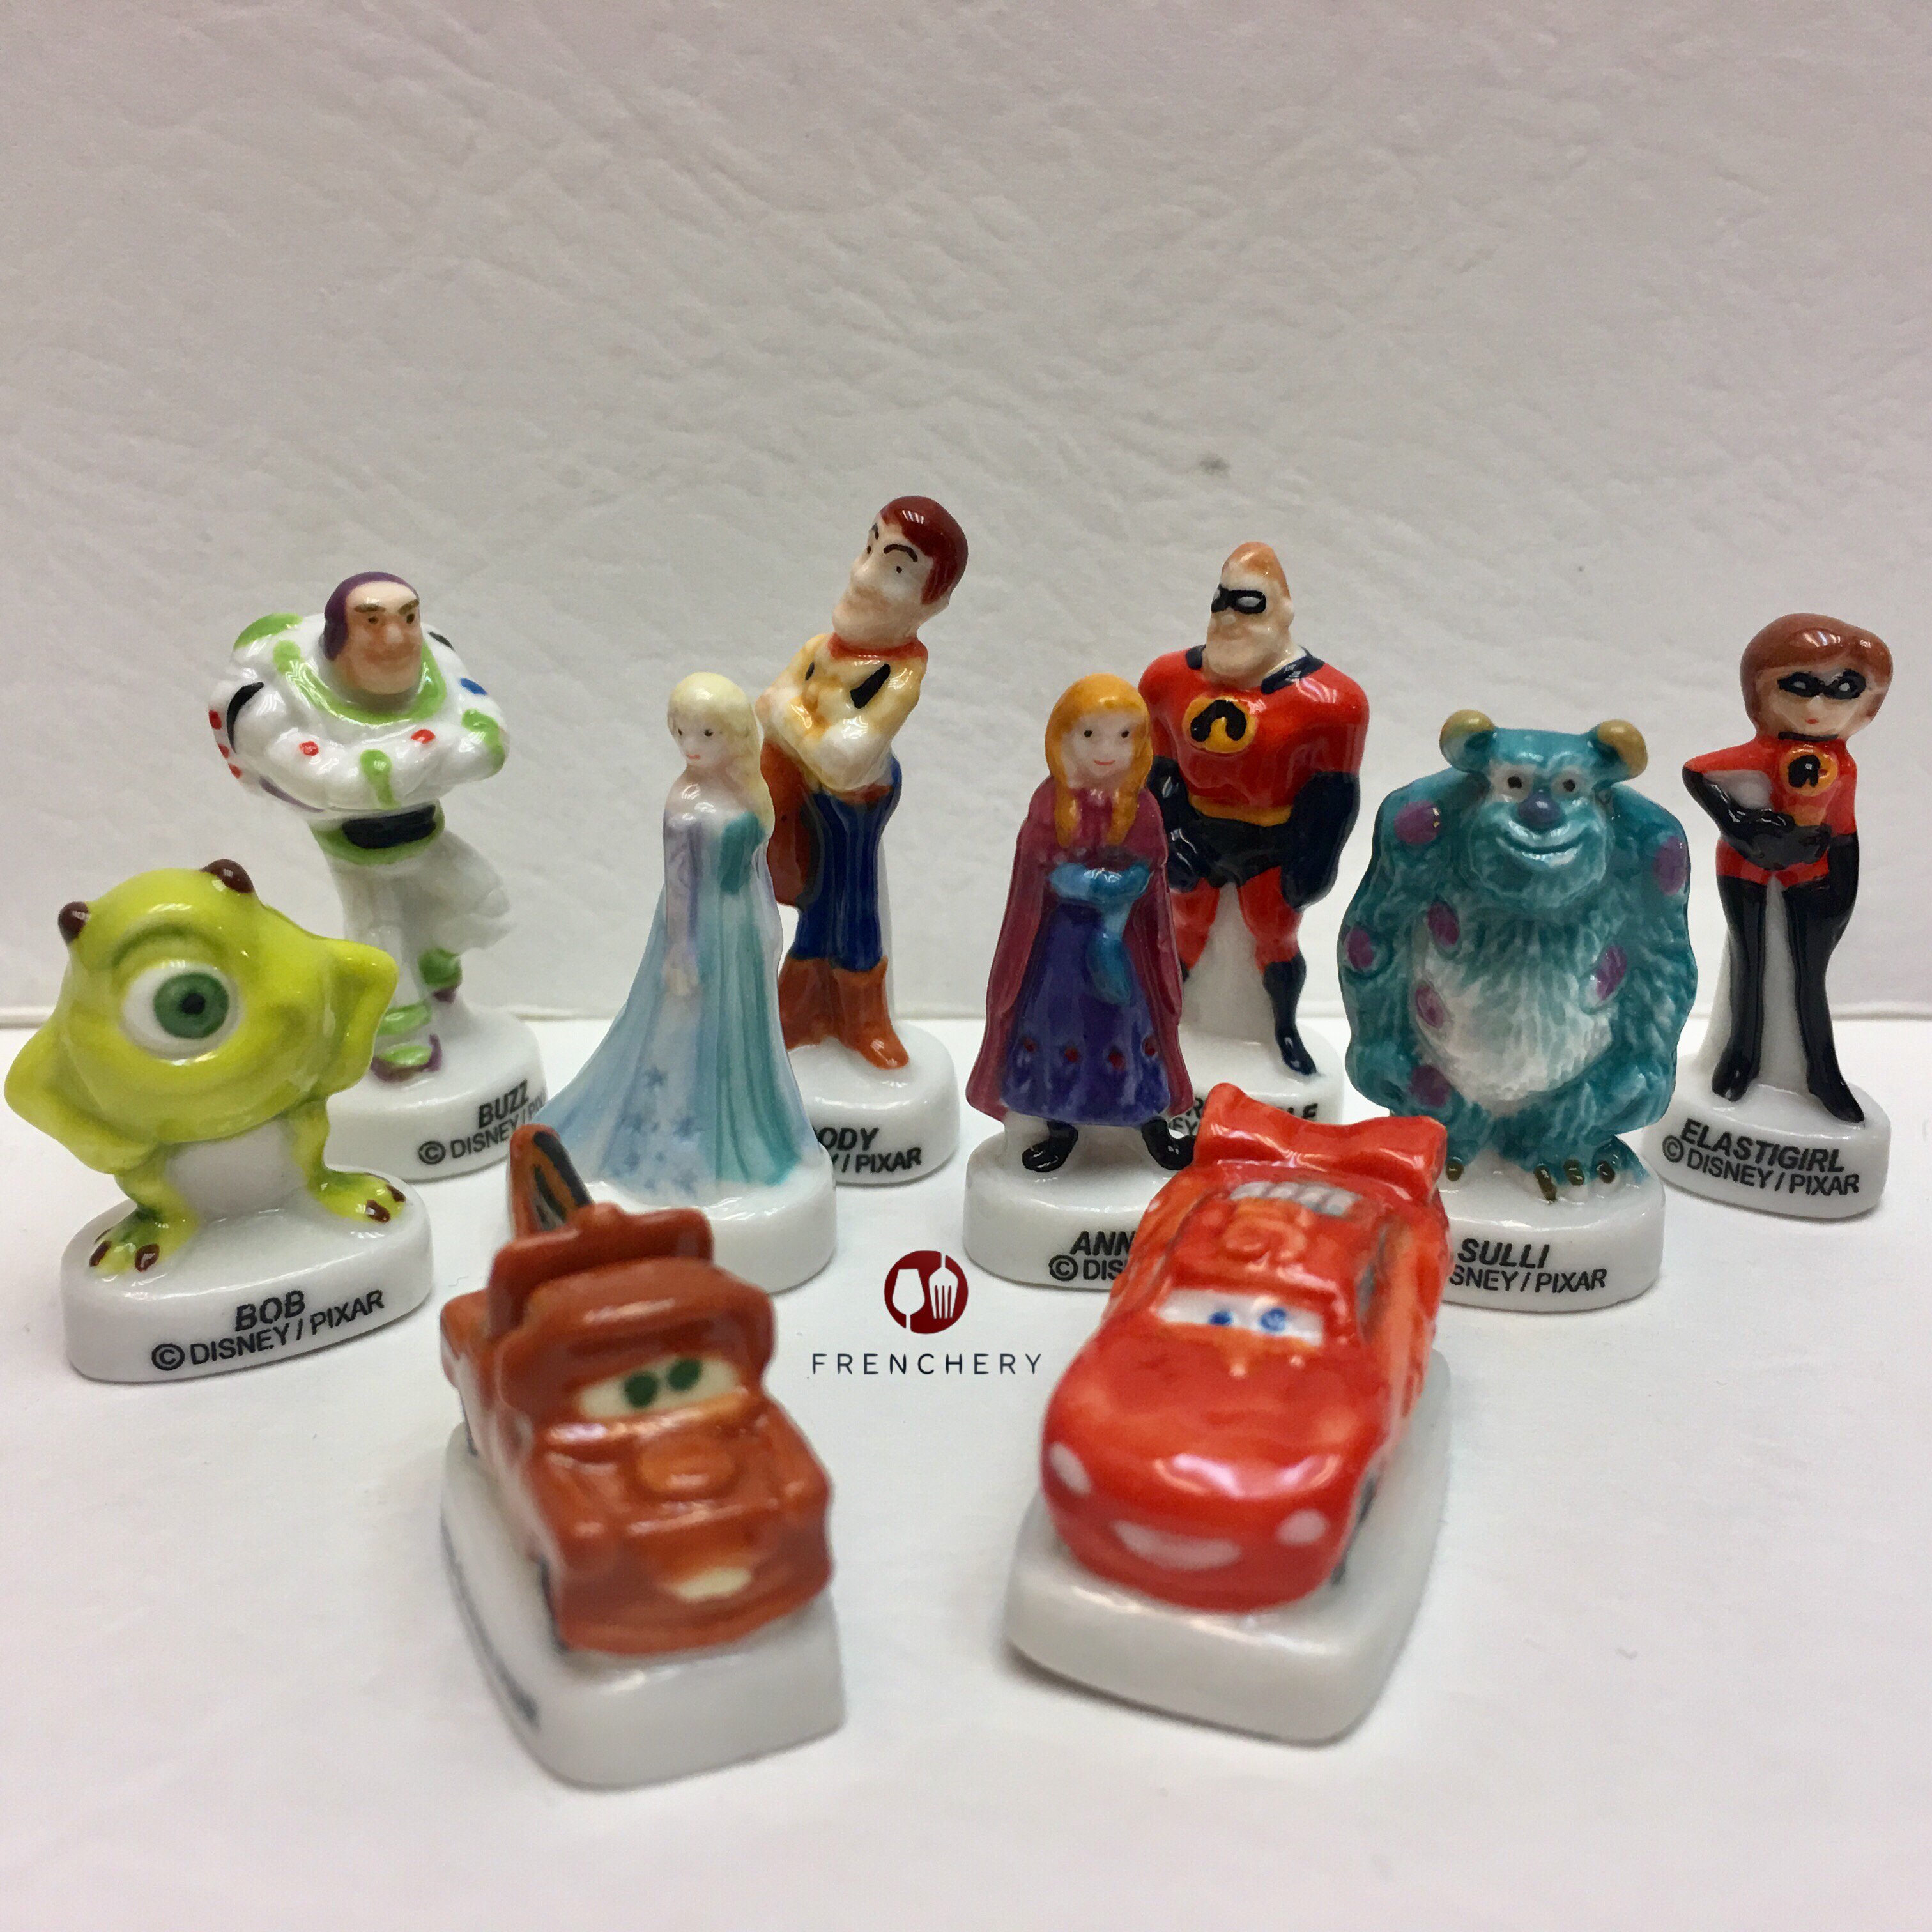 Frenchery on X: Just In: #Disney Santons Ceramic Figurines. These